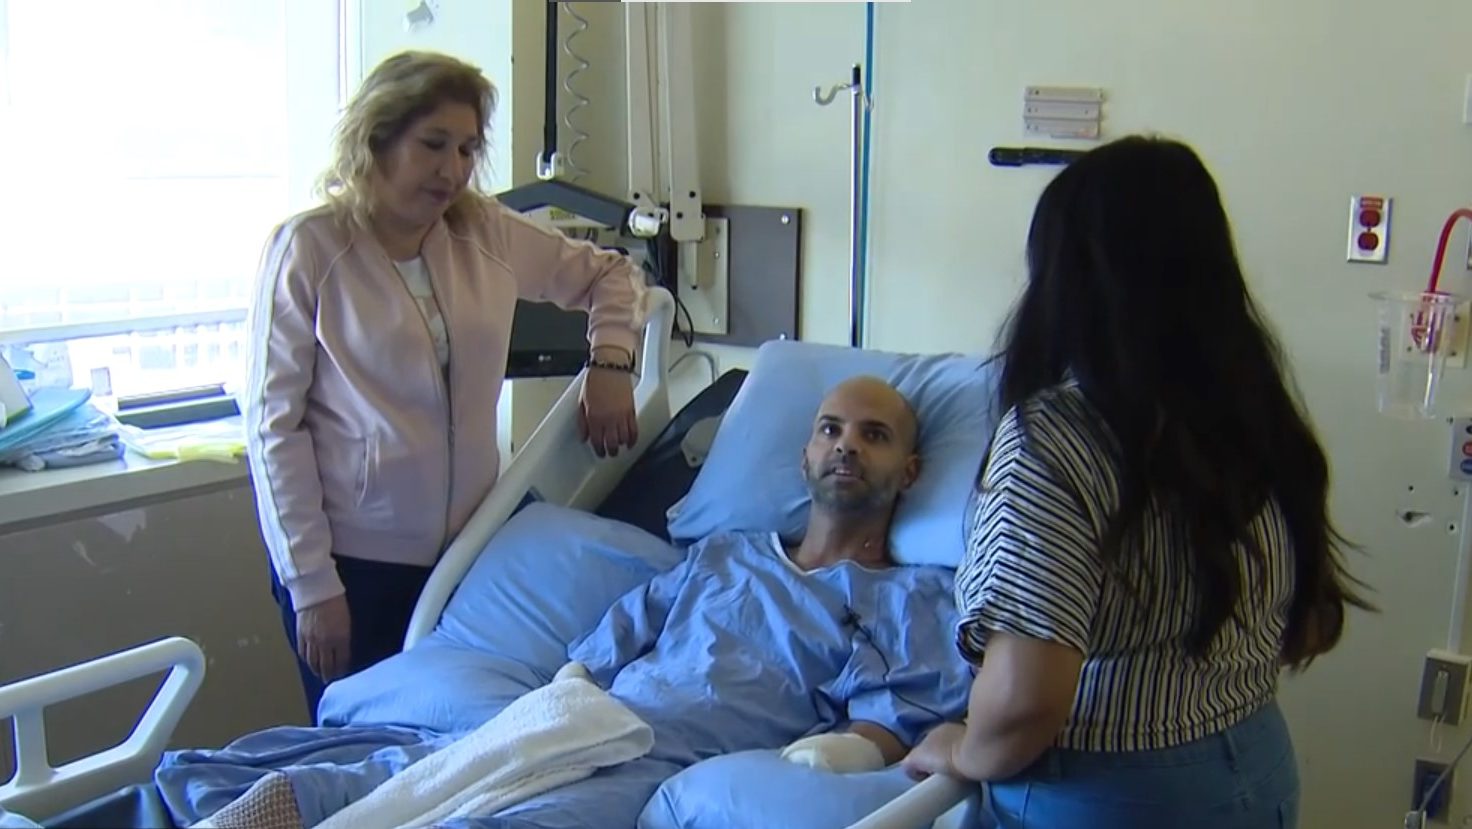 Man who nearly died gets big surprise from Toronto condo corp